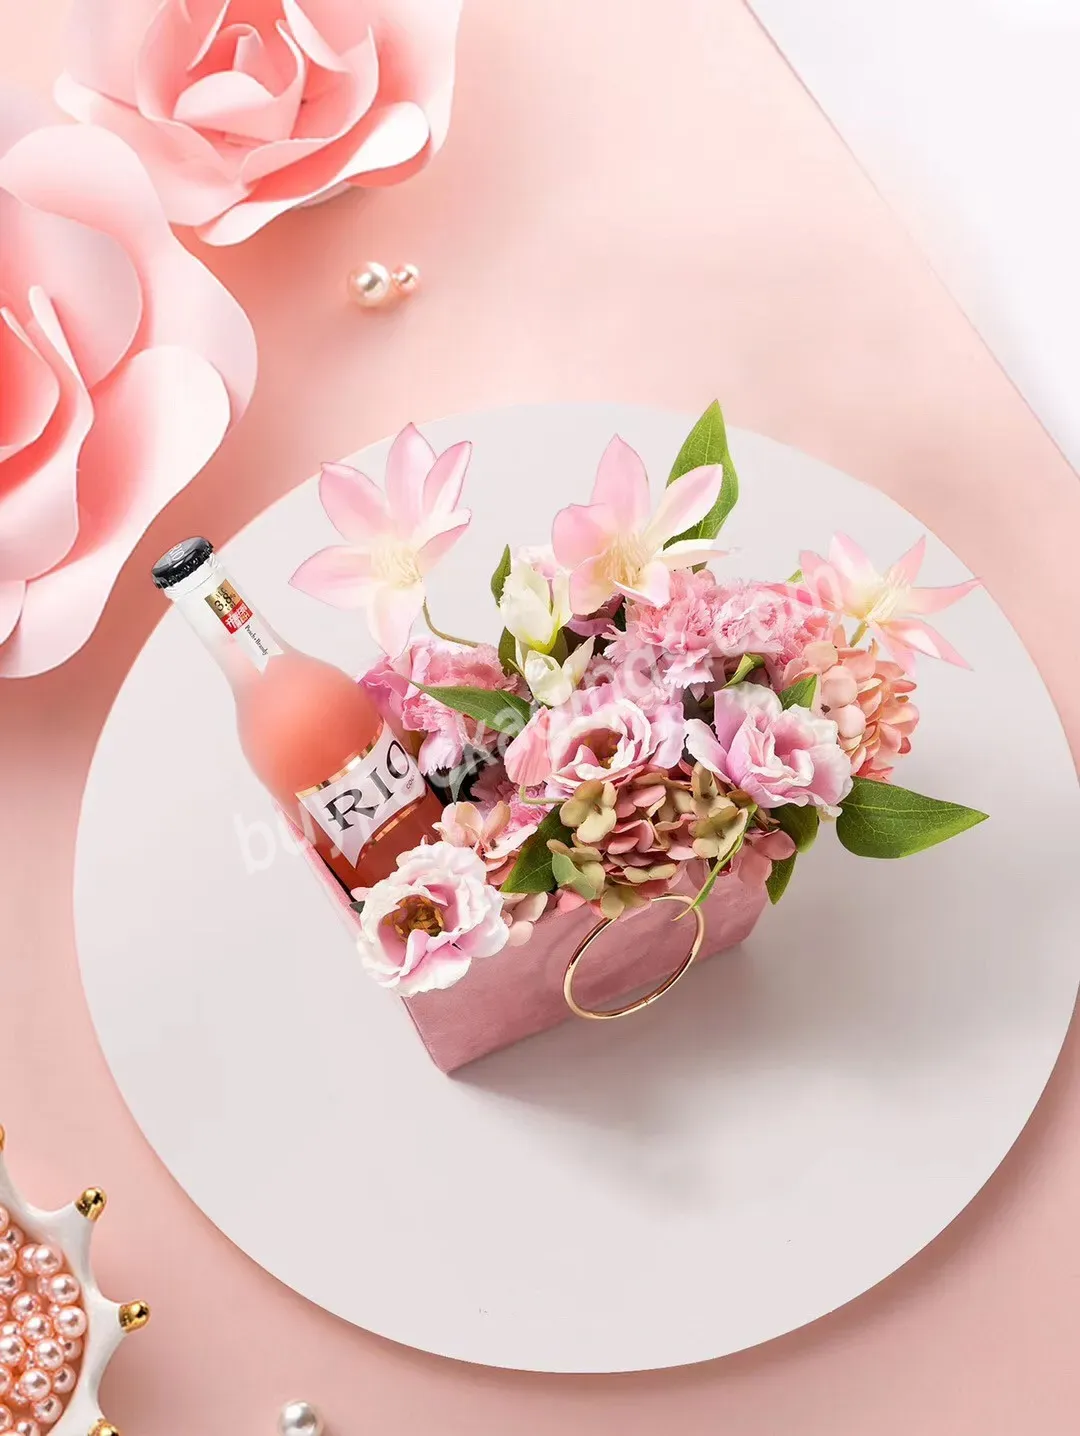 Elegant Fashionable Surface Flocking Flower Gift Box With Metal Handle For Valentine's Day - Buy Elegant Fashionable Surface Flocking Flower Gift Box,Flower Gift Box With Metal Handle,Flower Gift Box For Valentine's Day.